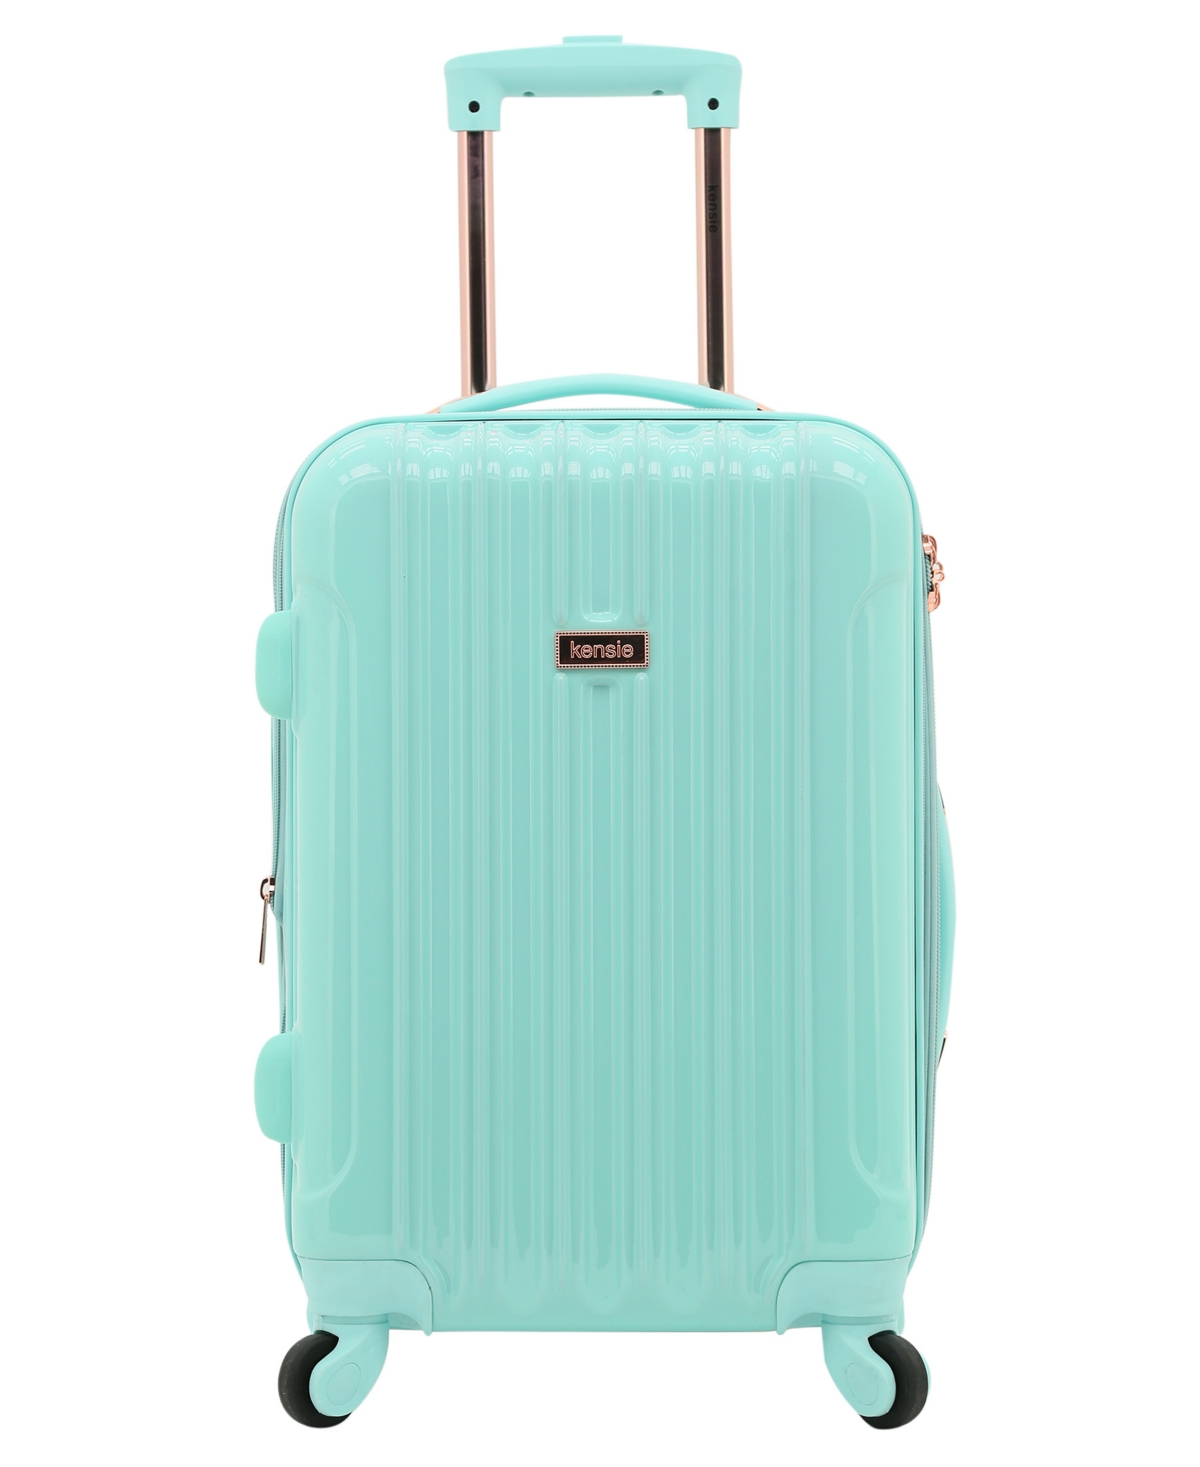 Kensie 20" Expandable Rolling Carry-on Luggage In Opal